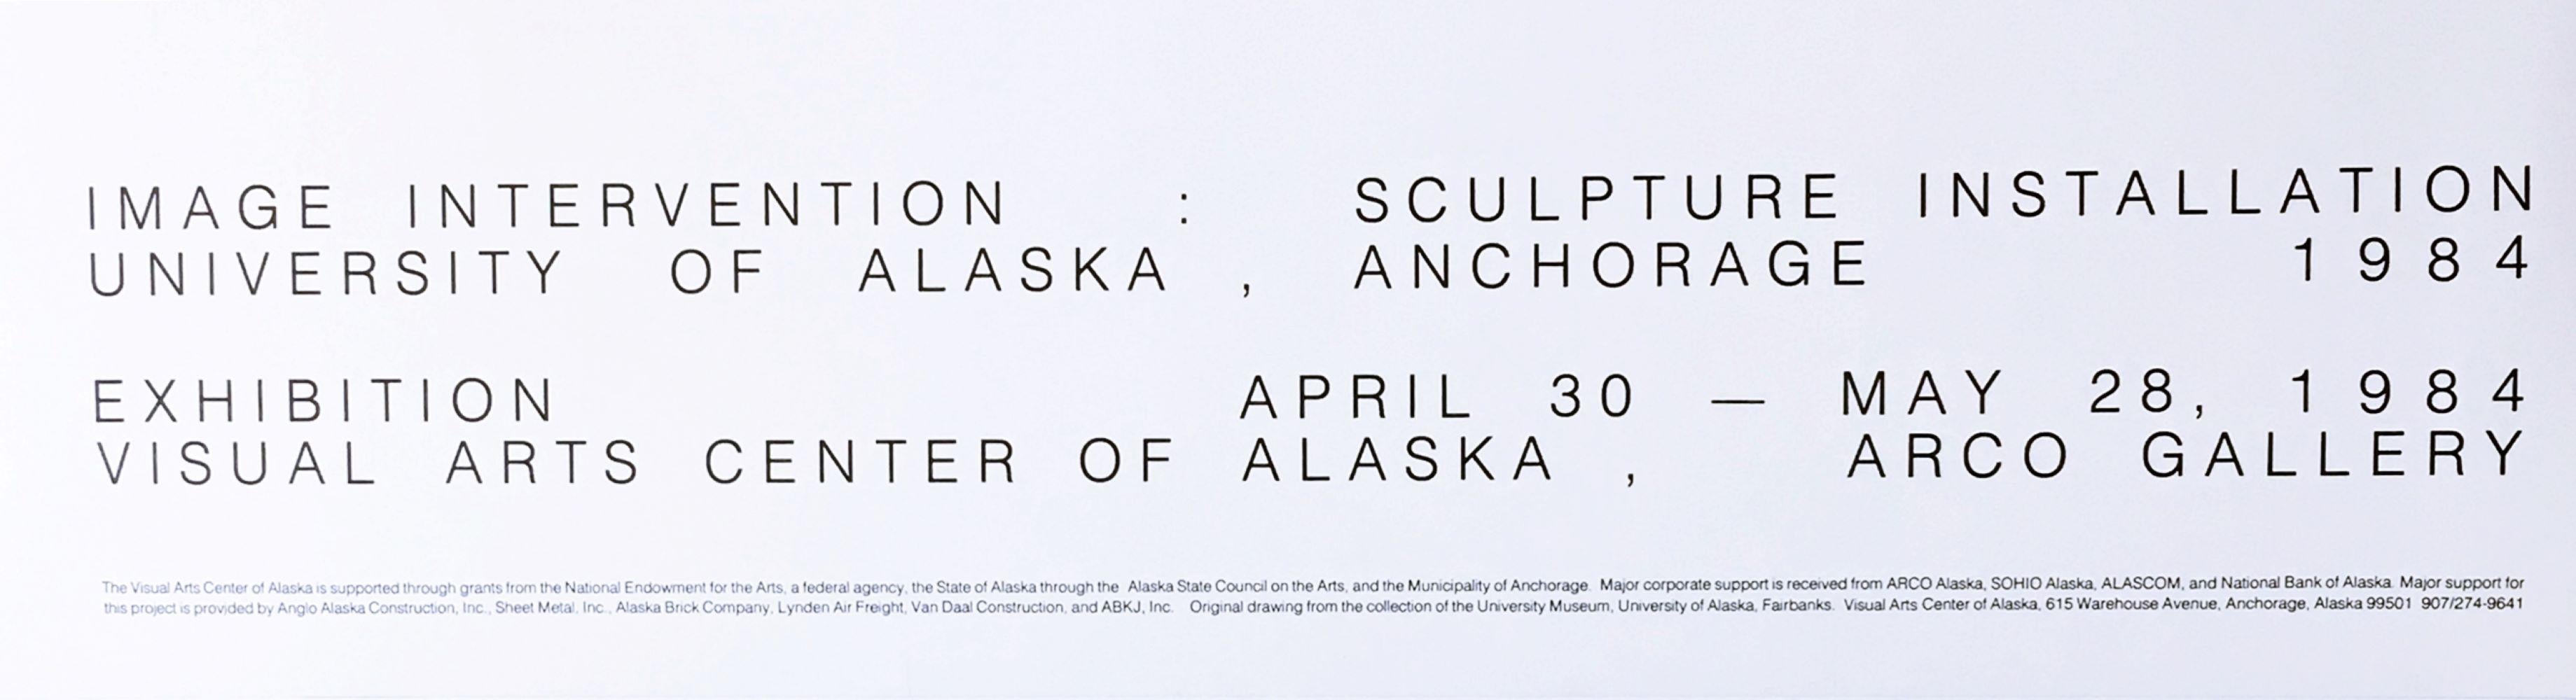 Image Intervention project in Alaska poster (Hand Signed by Dennis Oppenheim) For Sale 3